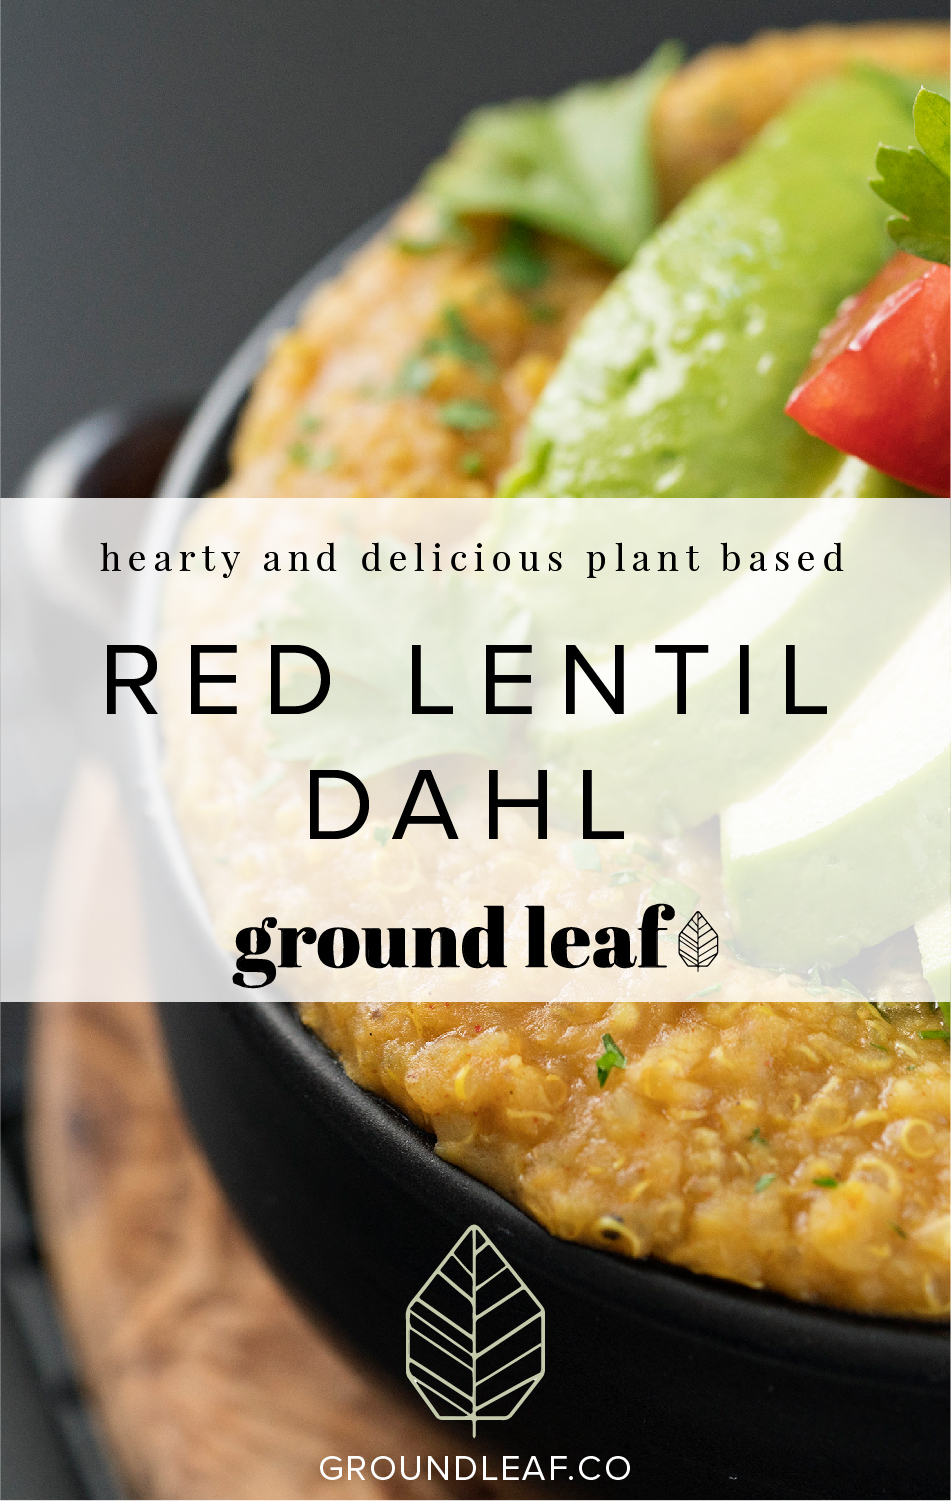 This is one of the simplest Ground Leaf recipes. Toss everything in the pressure cooker, press a few buttons, walk away, come back to a meal full of protein and full of flavor. Add some tomatoes and avocados for a delicious plant based meal.